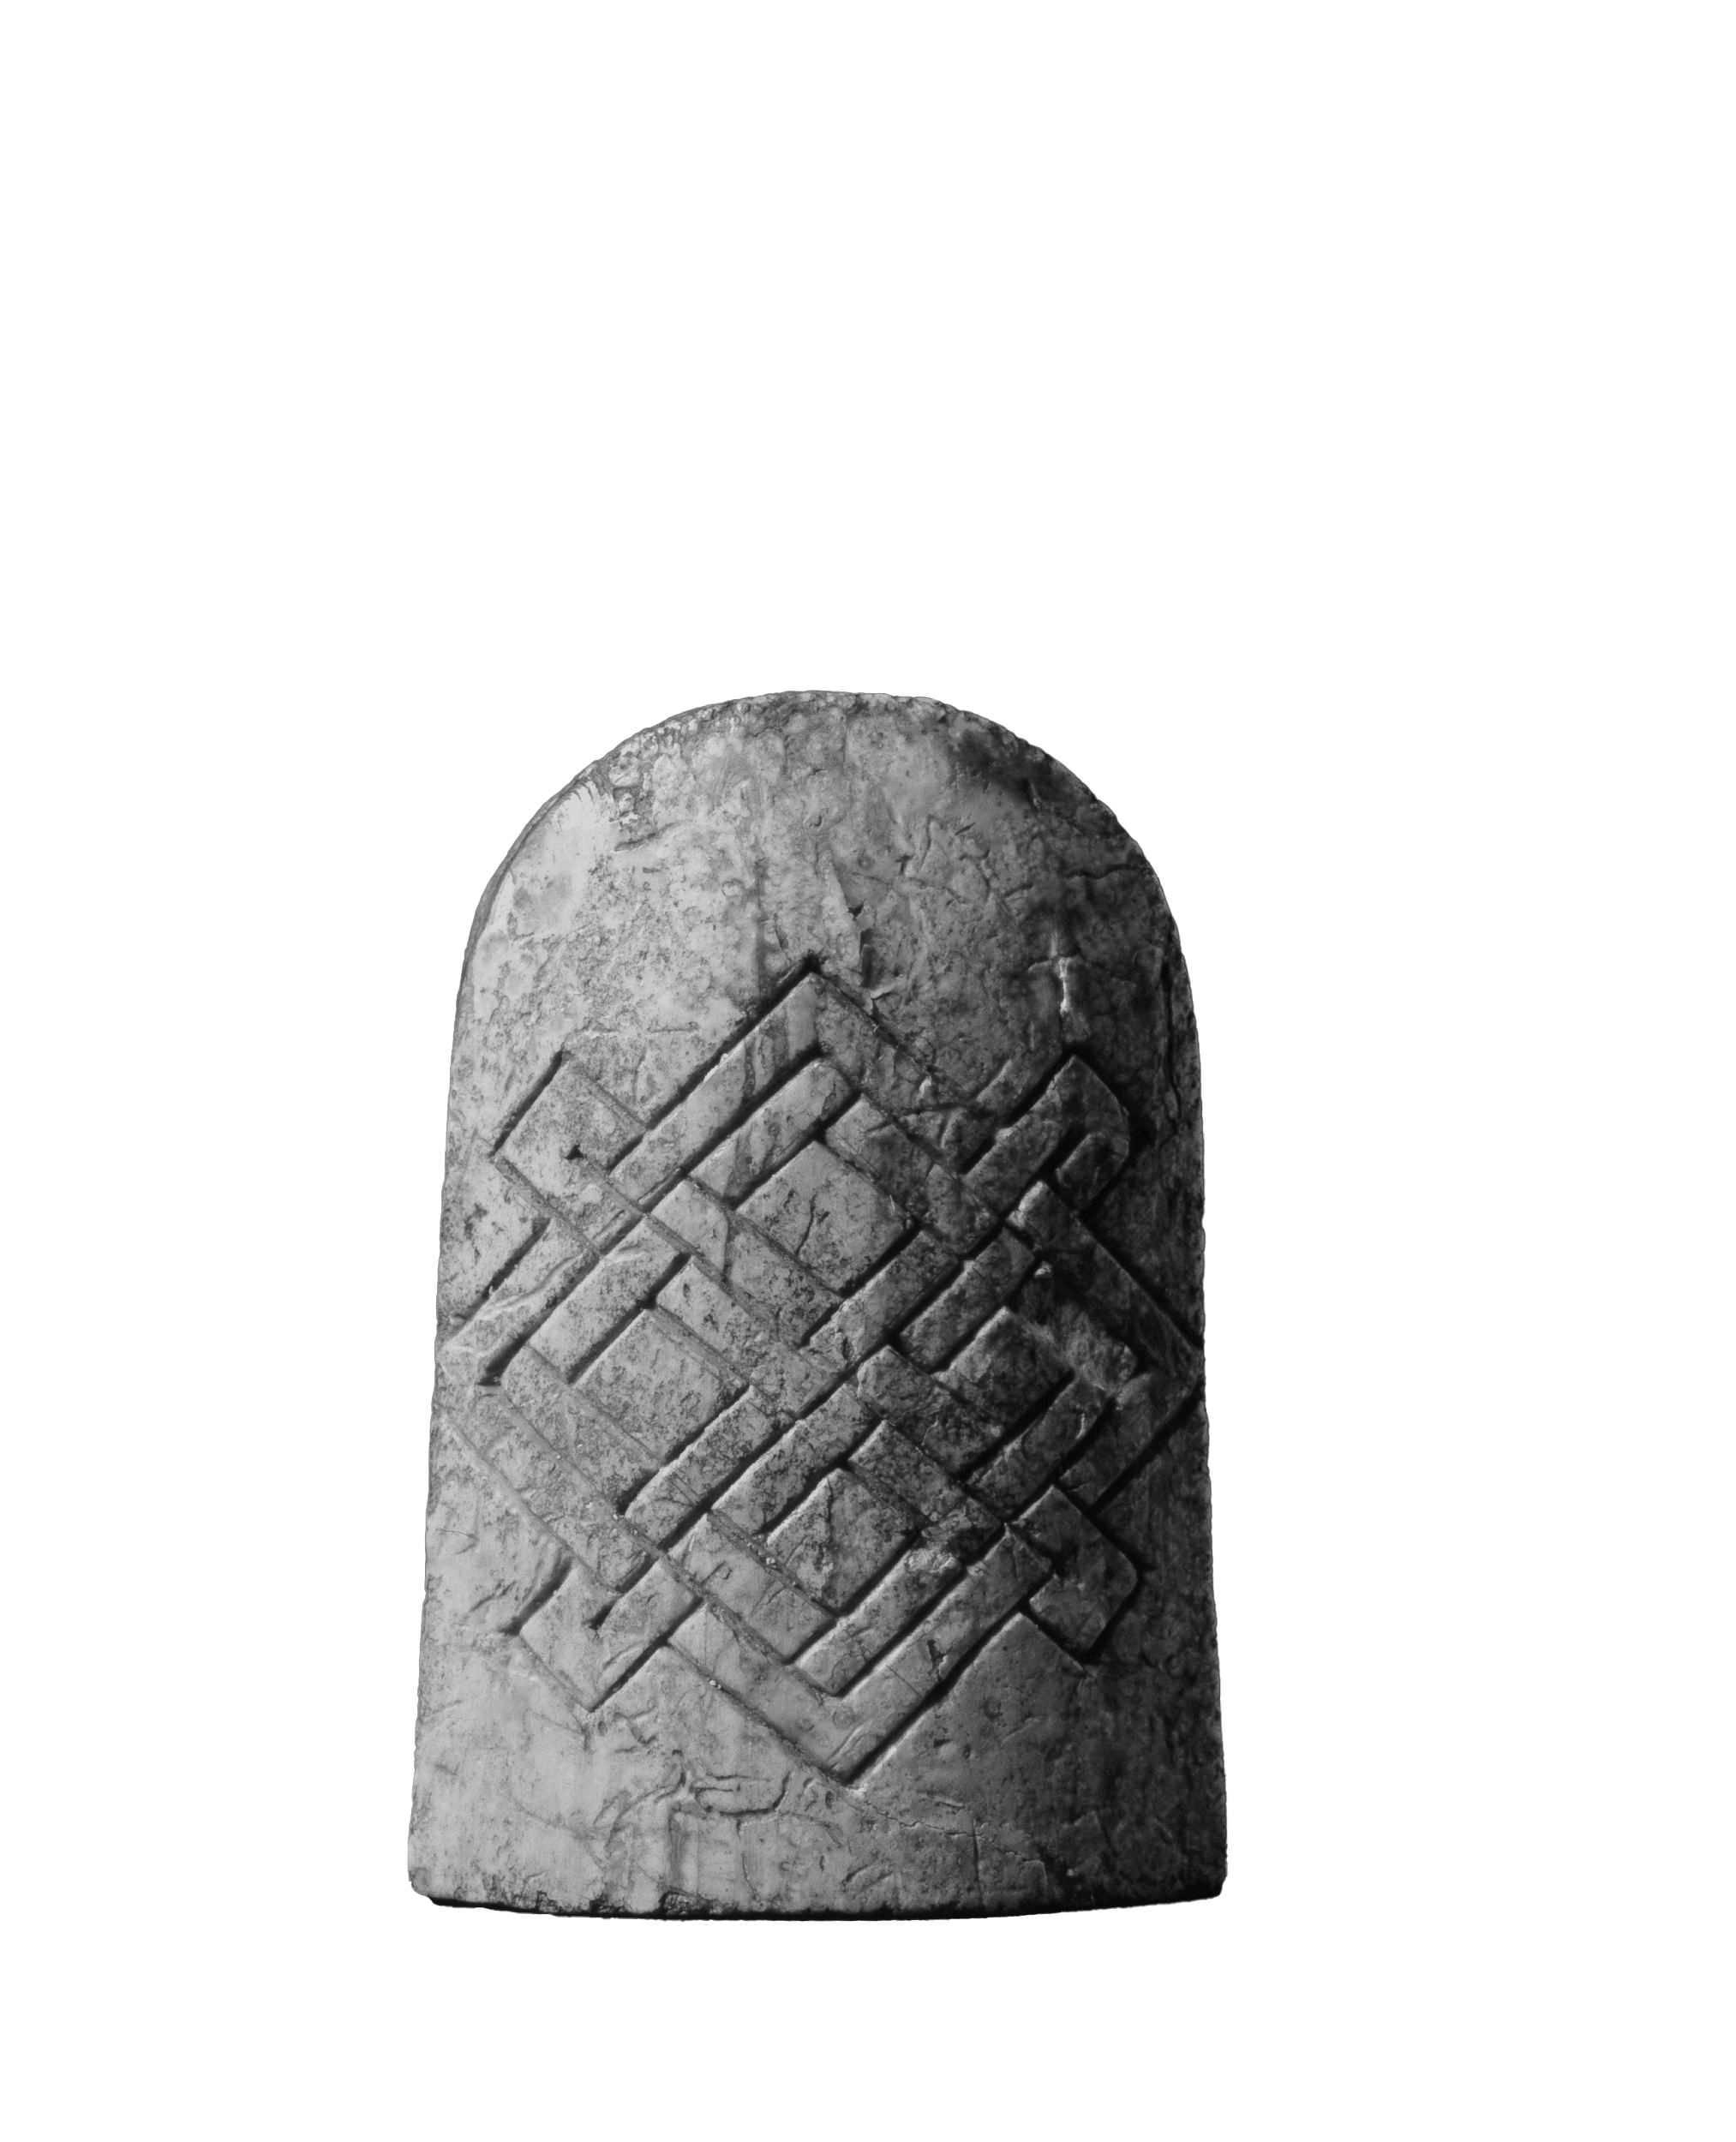 A medieval chess piece made of stone